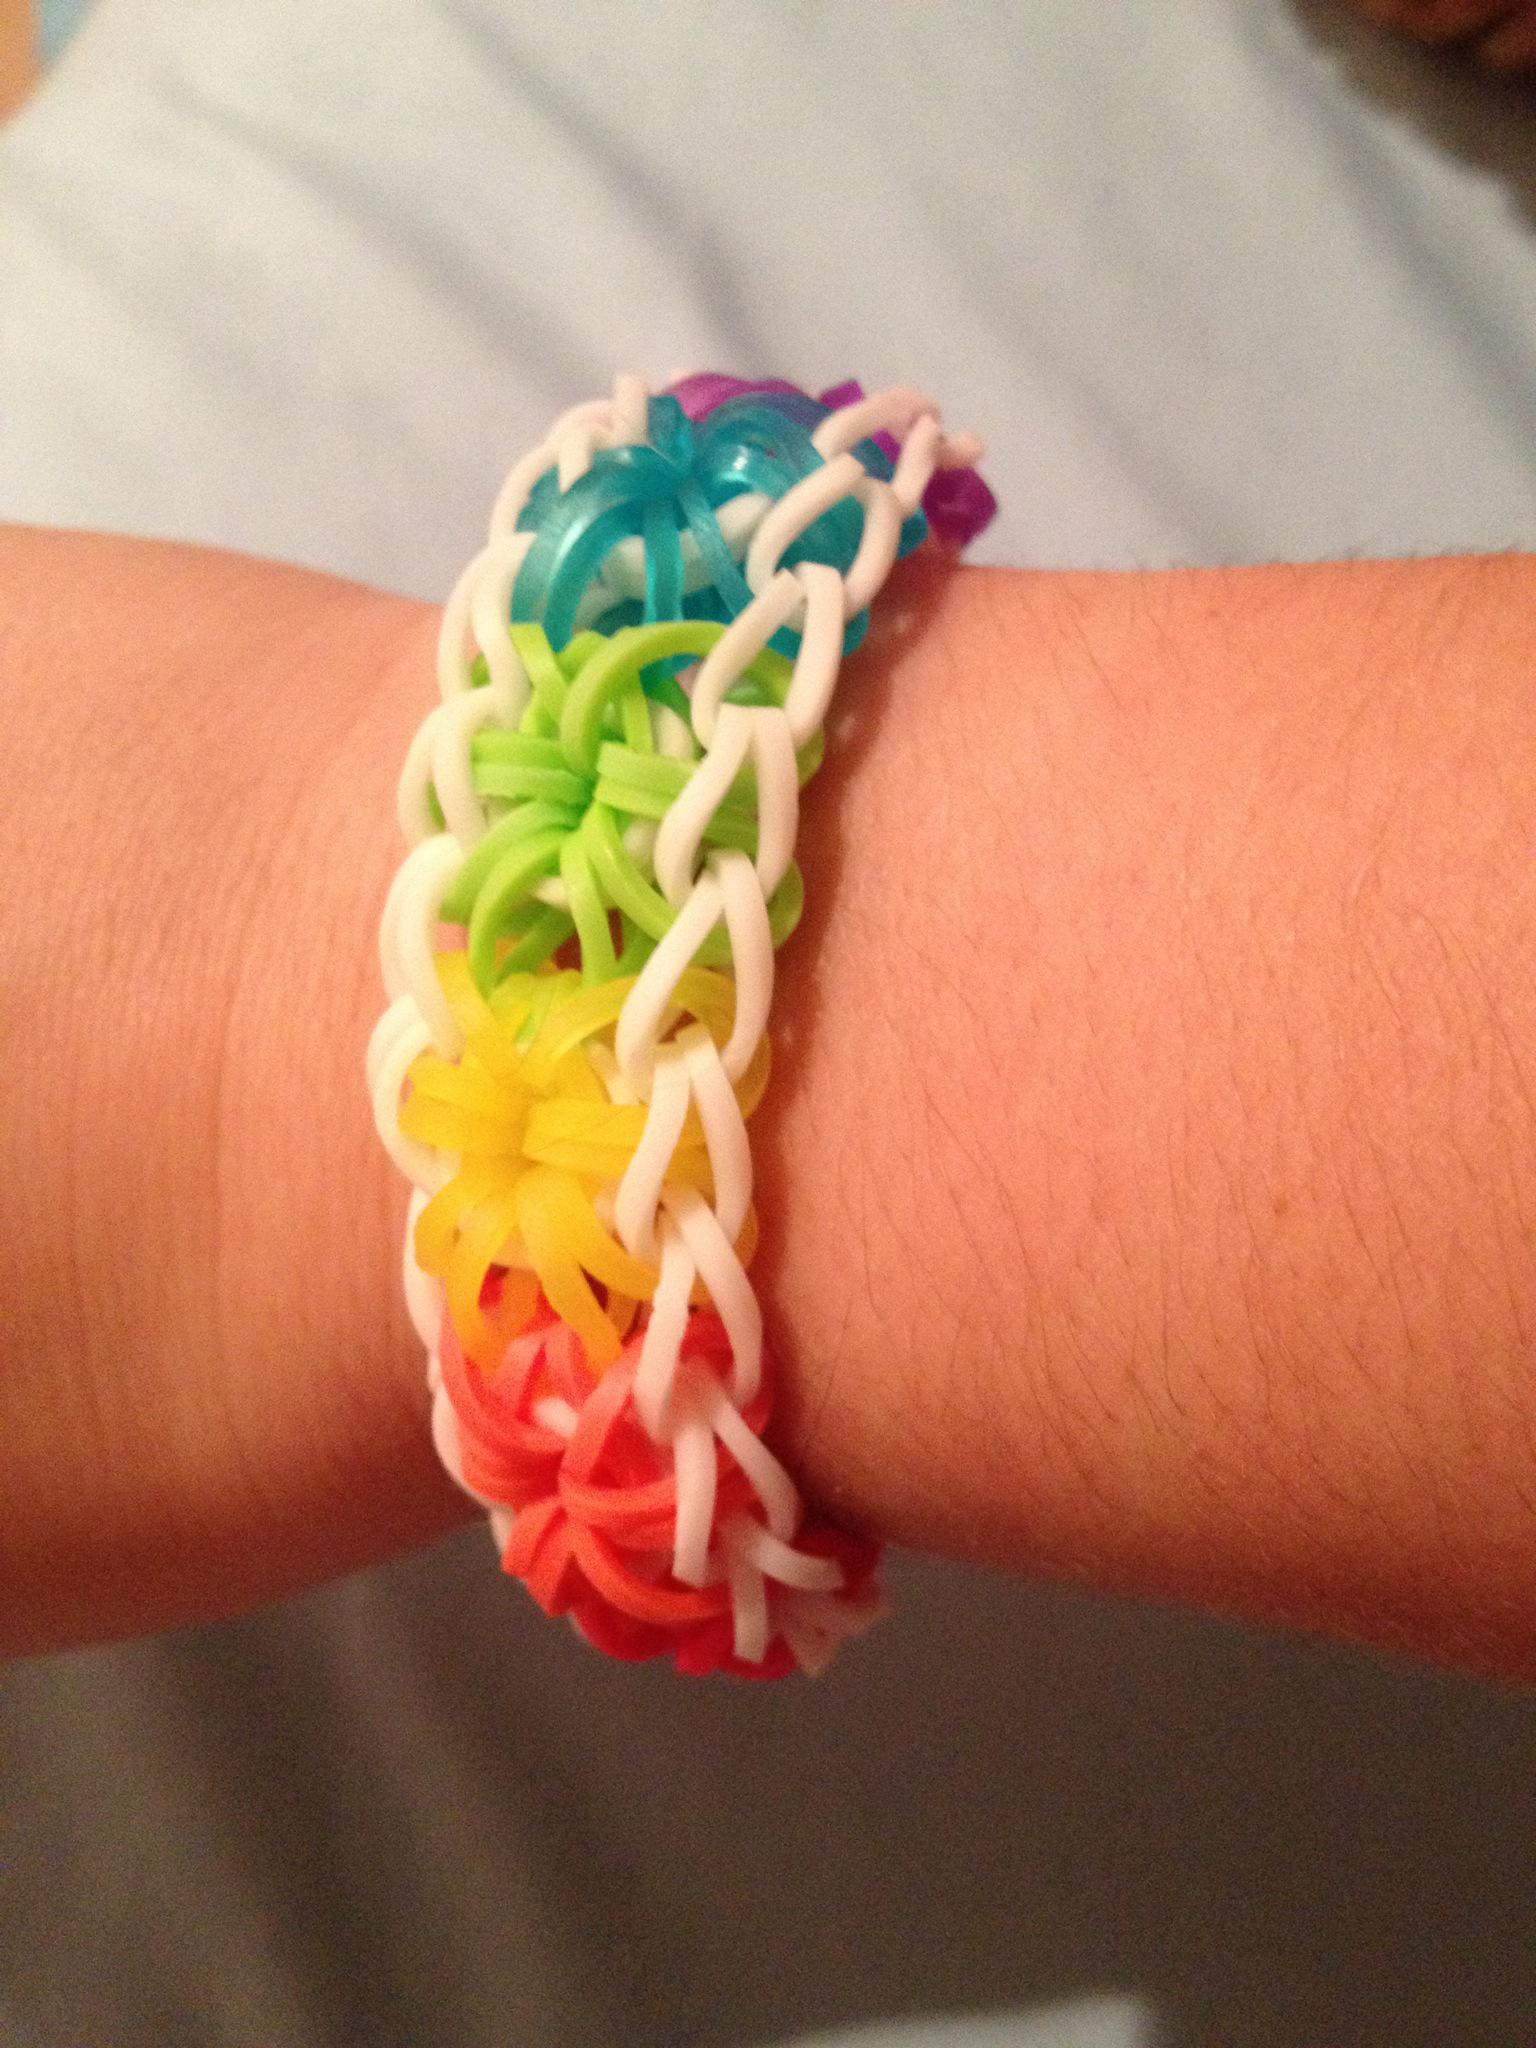 LOOM RUBBER BAND JEWELRY FOR BEGINNERS: The Picture Guide on How to Make  Rubberband Projects Such as Single, Double and Starburst Bracelet Using  Rainbow Loom from Scratch at Home: Salazar, Ralph: 9798753200143: